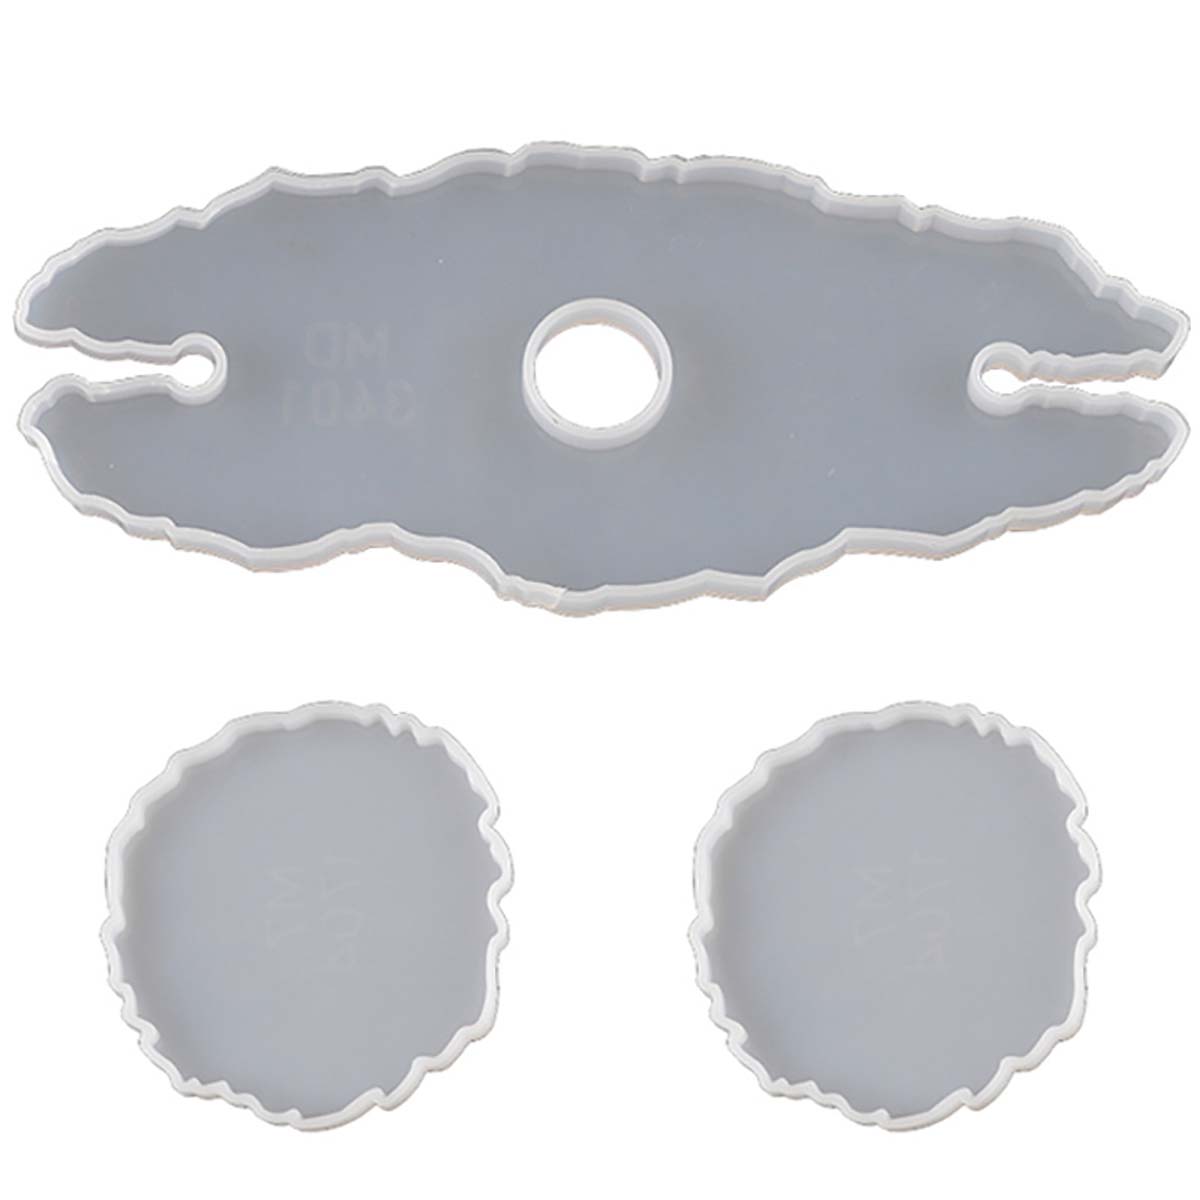 3Pcsset-Rack-Tray-Silicone-Mold--Coaster-Moulds-Glass-Goblet-Holder-Epoxy-Resin-Molds-DIY-Craft-1724151